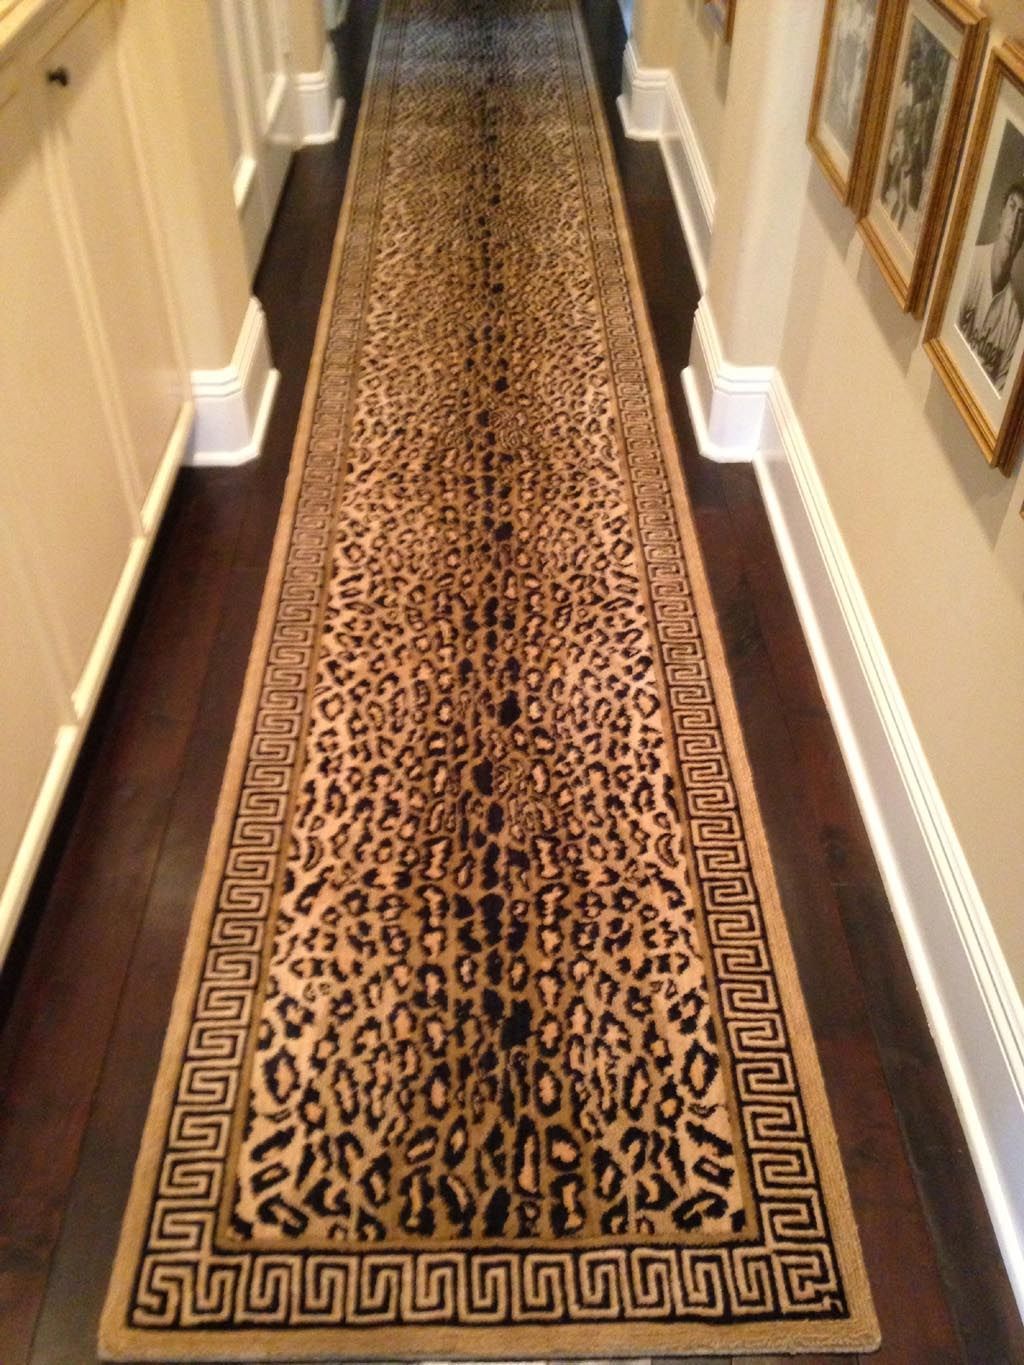 Area Rugs Outstanding Runner Rugs For Hallway Rug Runners With With Regard To Hallway Rug Runners (View 6 of 20)